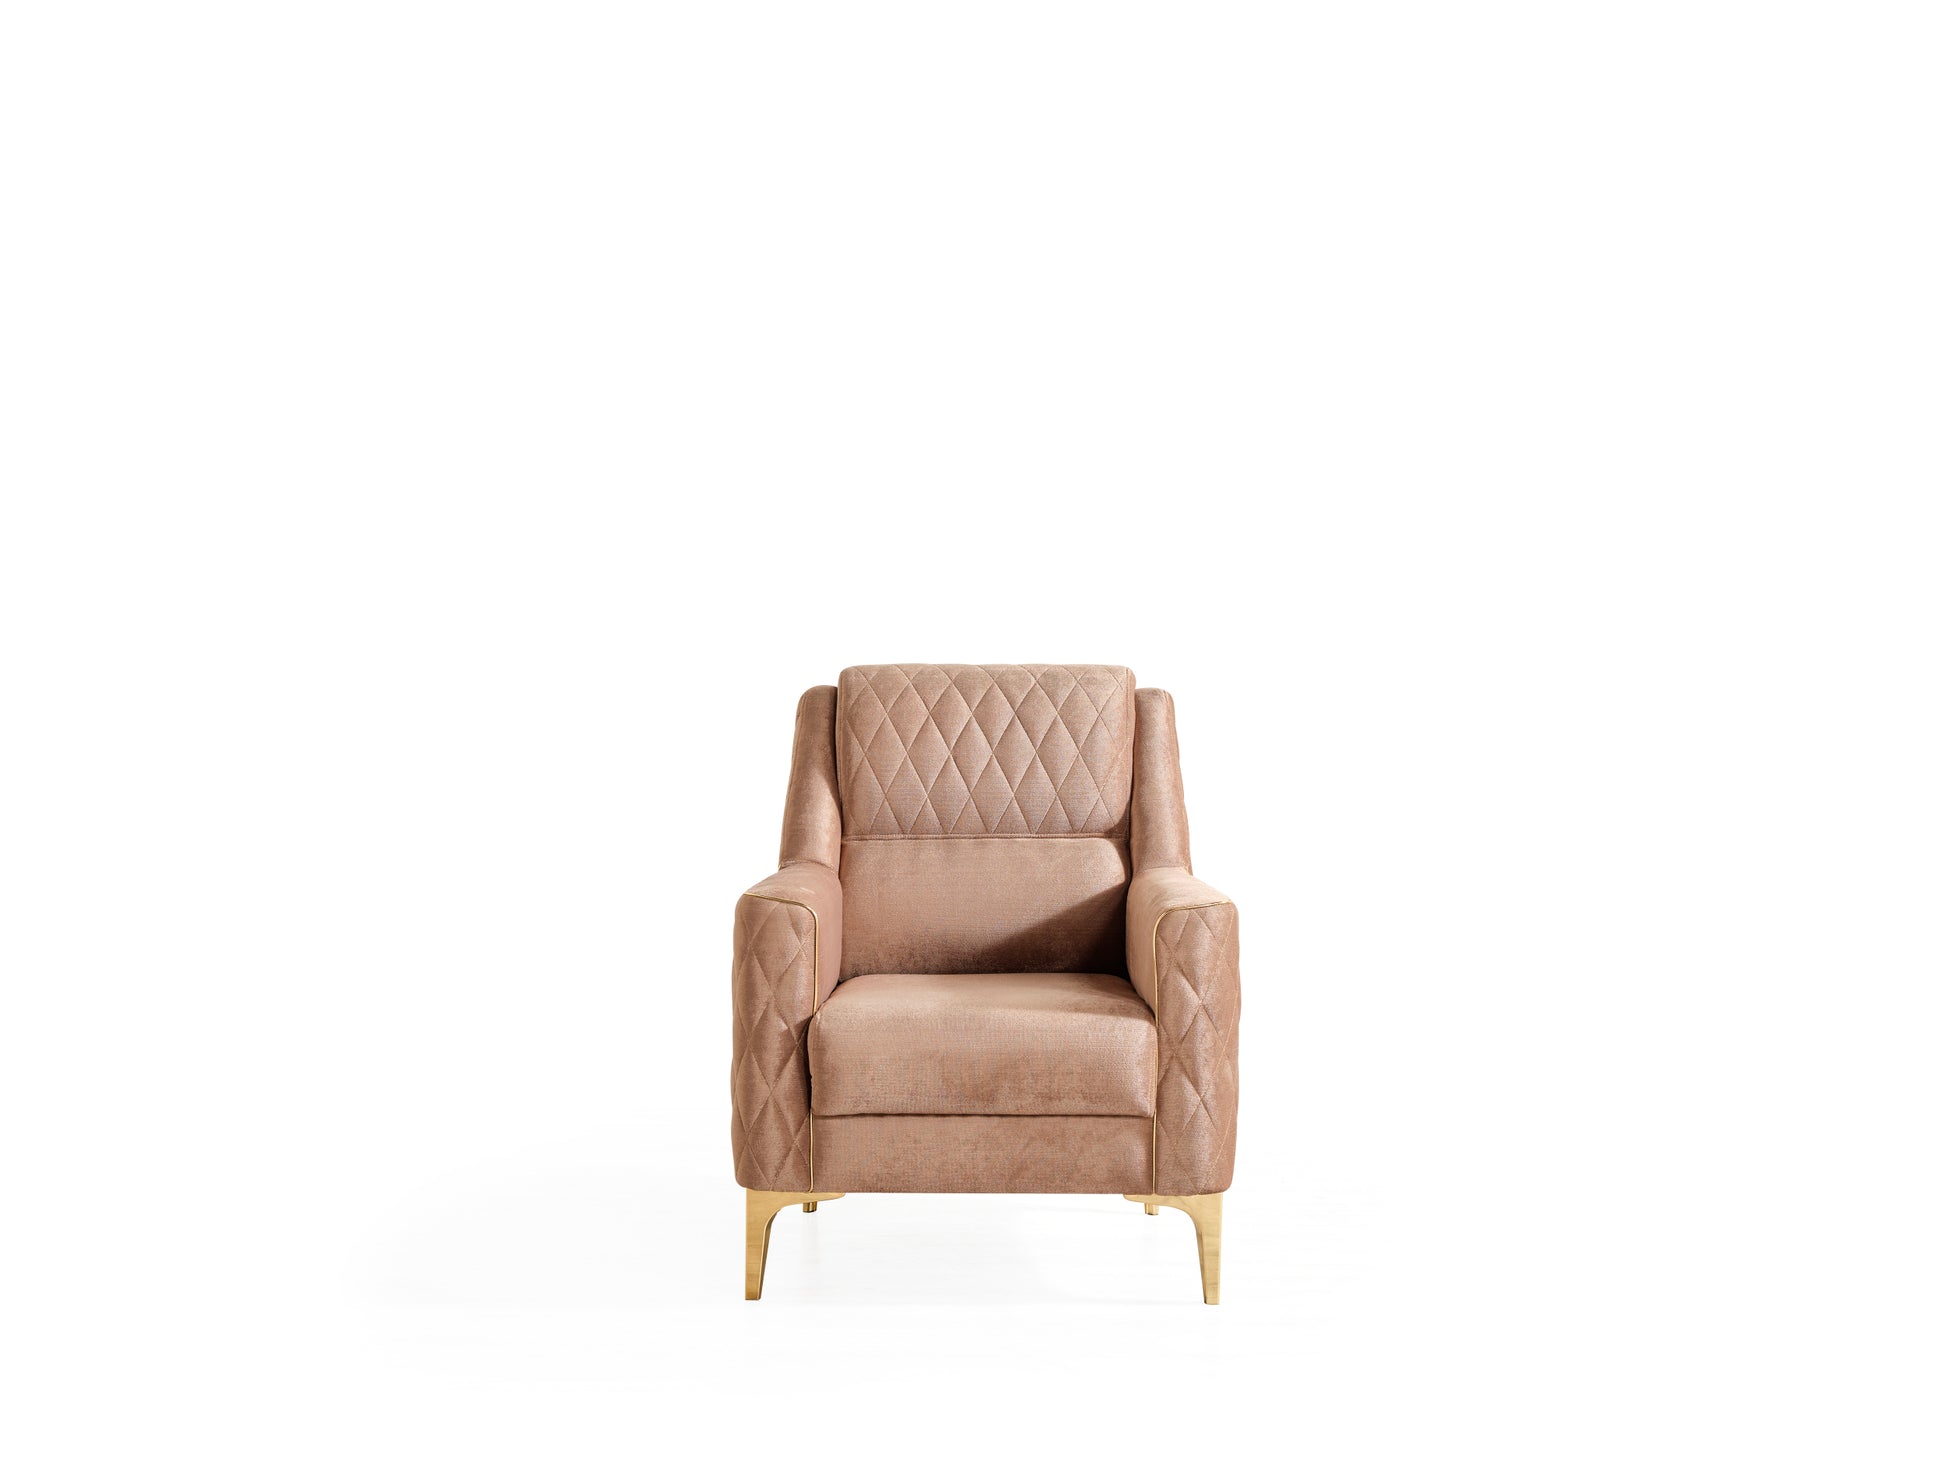 Luna Modern Style Chair in Copper copper-primary living